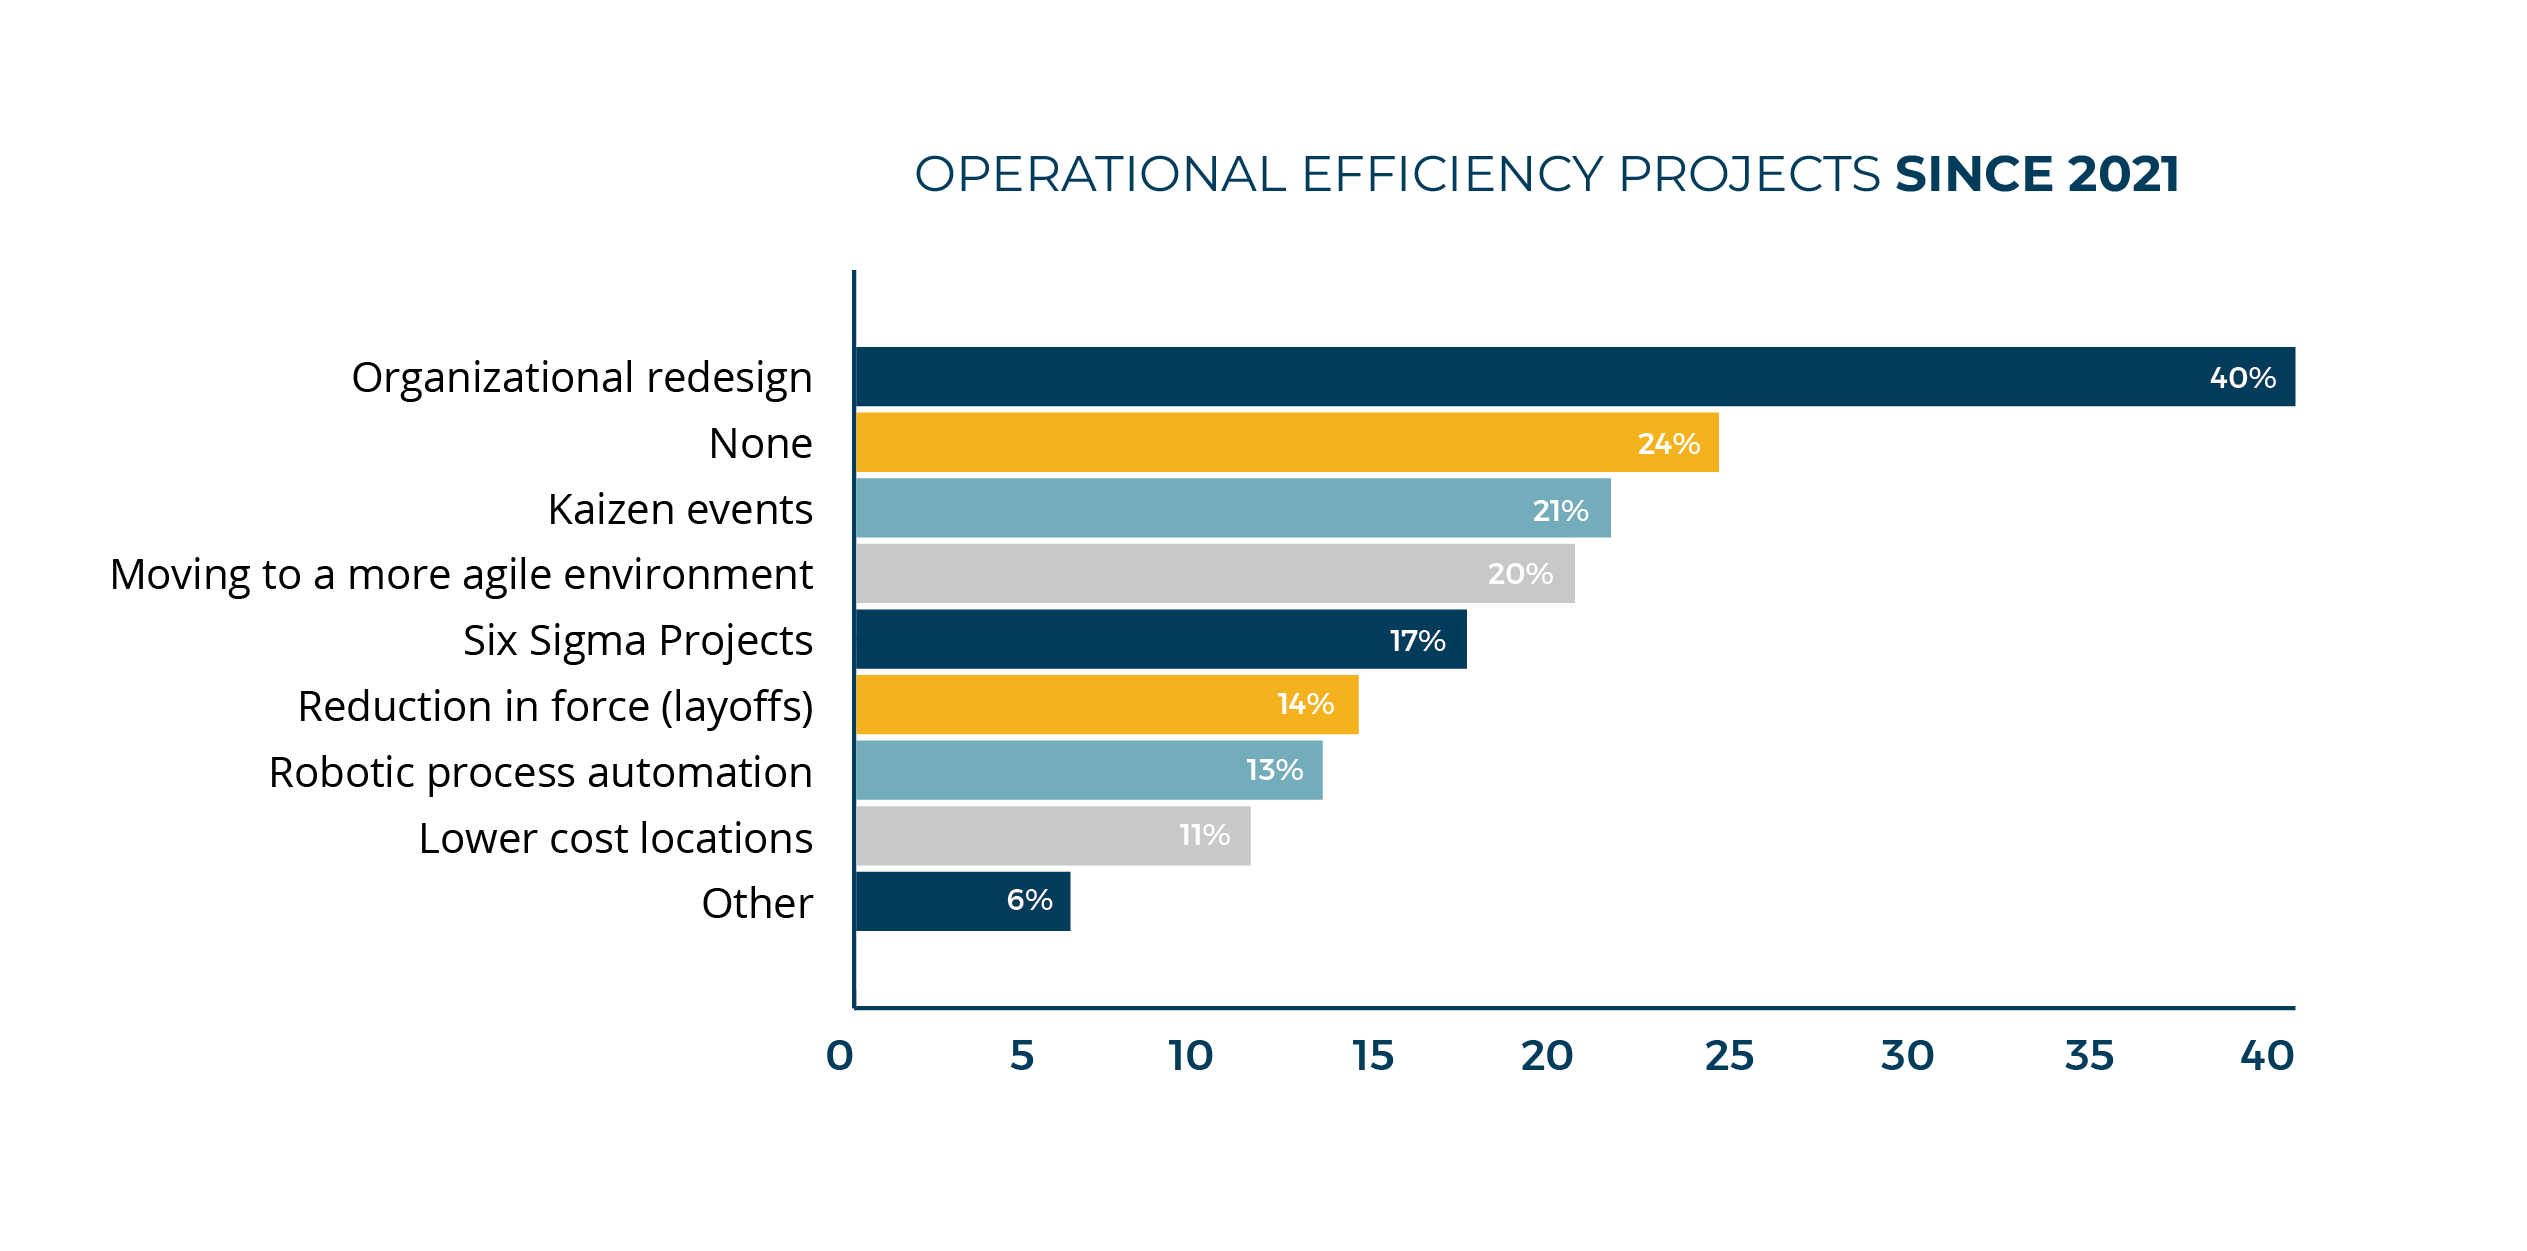 Operational Efficiency Projects Since 2021